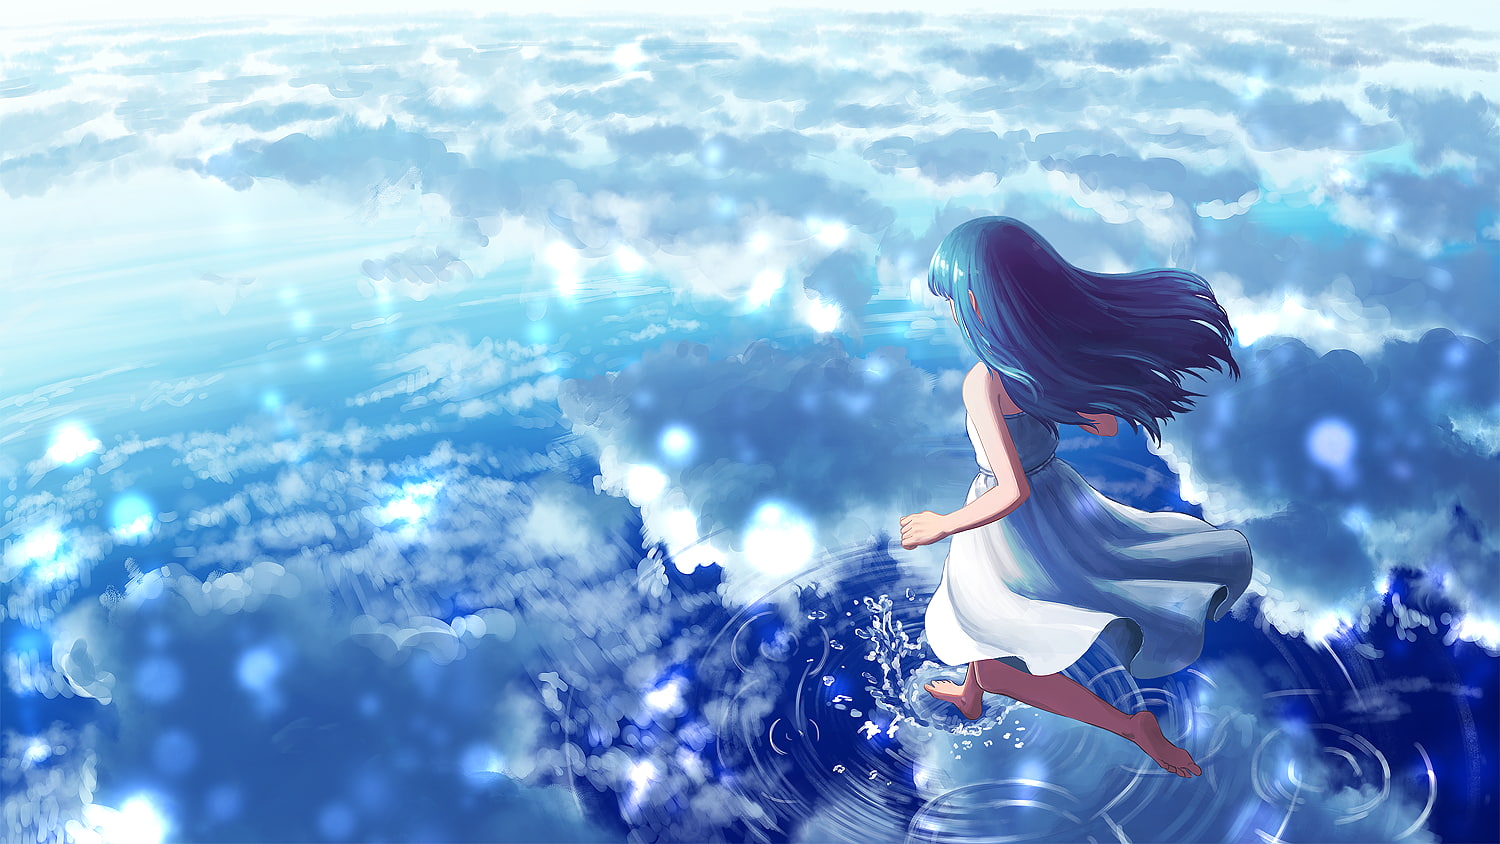 anime girl, clouds, water, walking on water, one person, nature